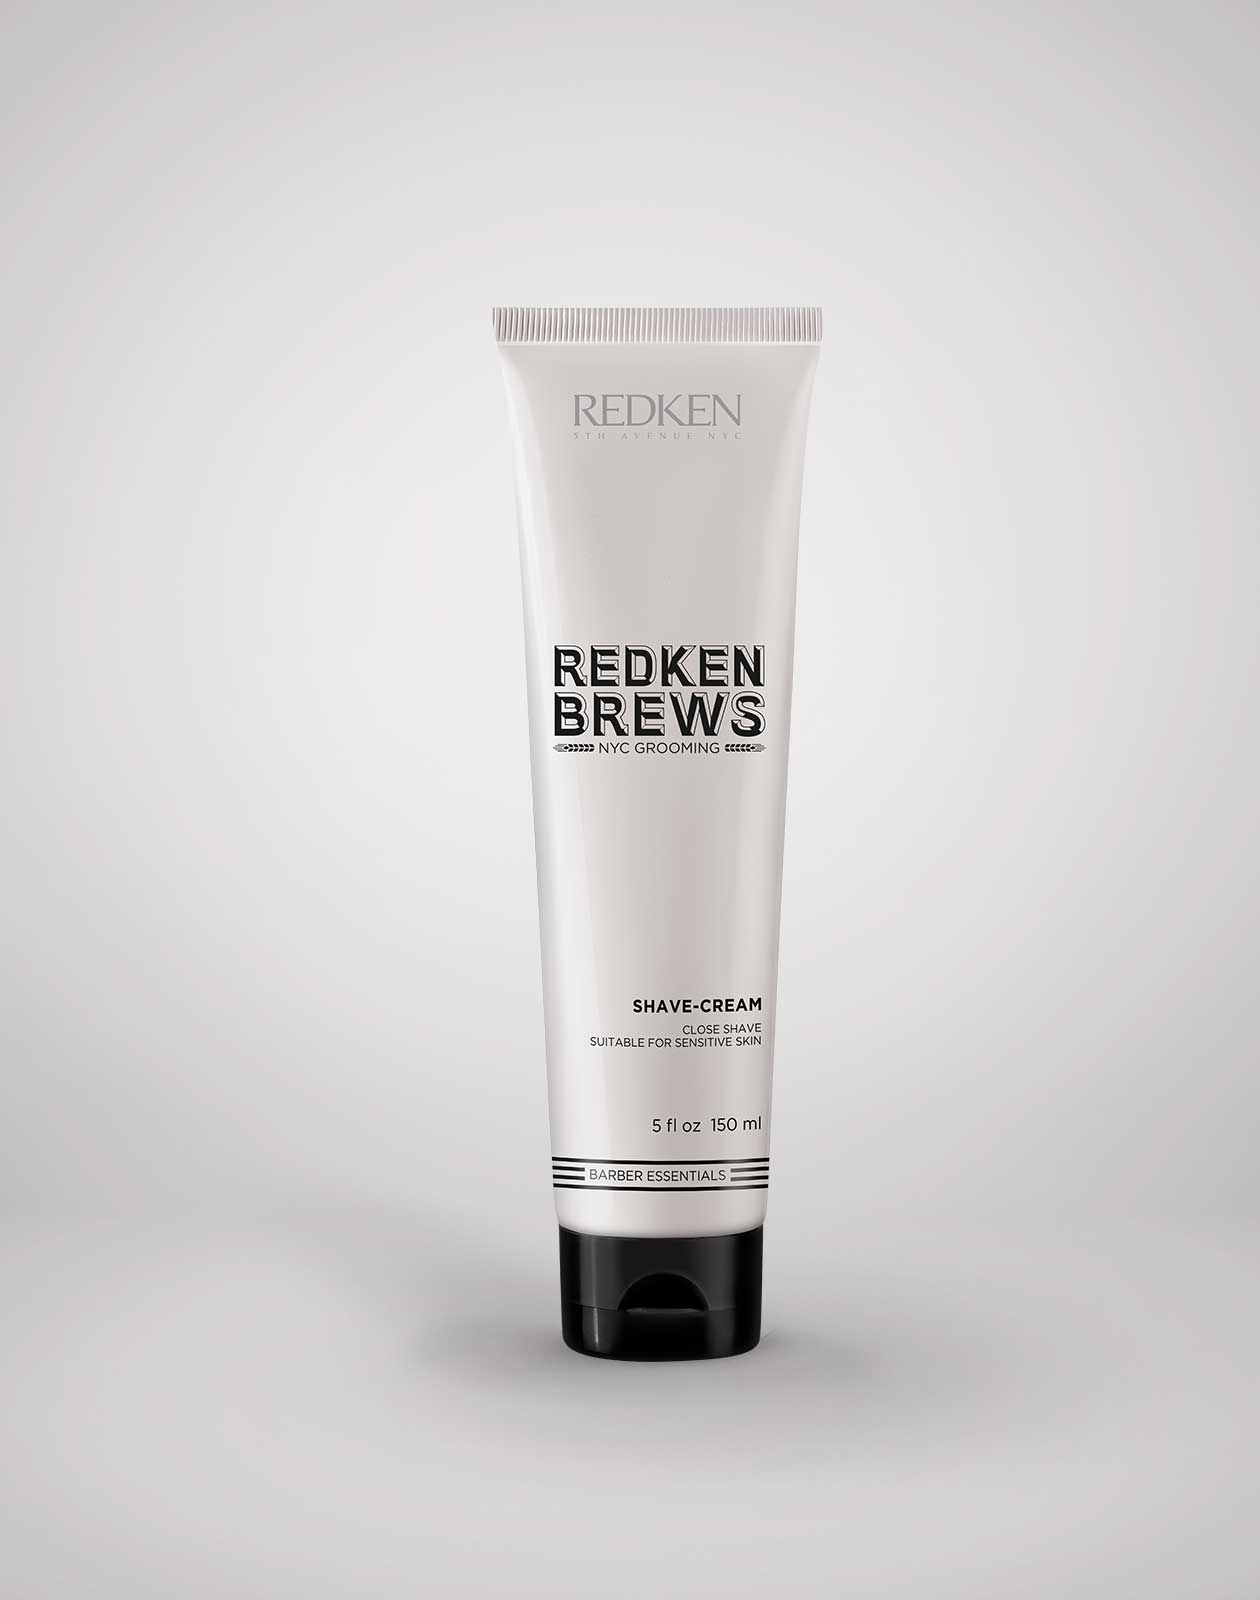 REDKEN BREWS_Shave Cream - Close Shave suitable for sensitive skin_Cosmetic World